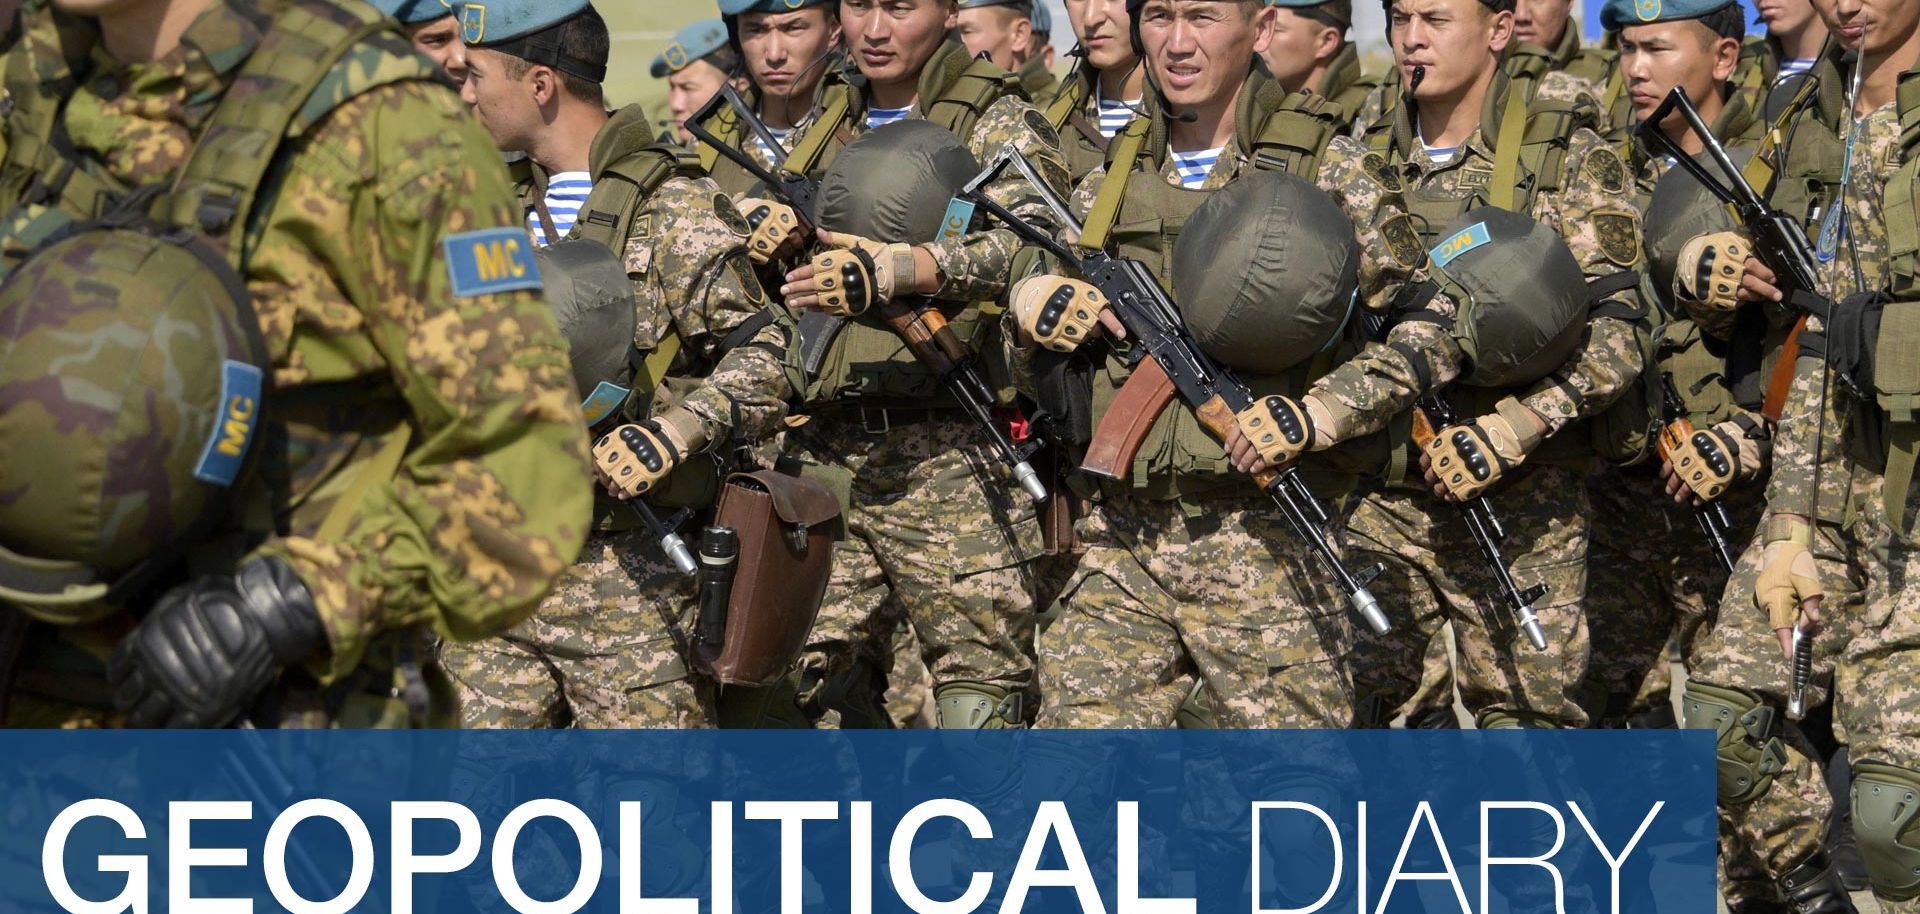 Soldiers take part in a joint exercise of the Collective Security Treaty Organization (CSTO) Peacekeeping Forces at a training ground in Armenia on September 30, 2015. AFP PHOTO / KAREN MINASYAN (Photo credit should read KAREN MINASYAN/AFP/Getty Images)